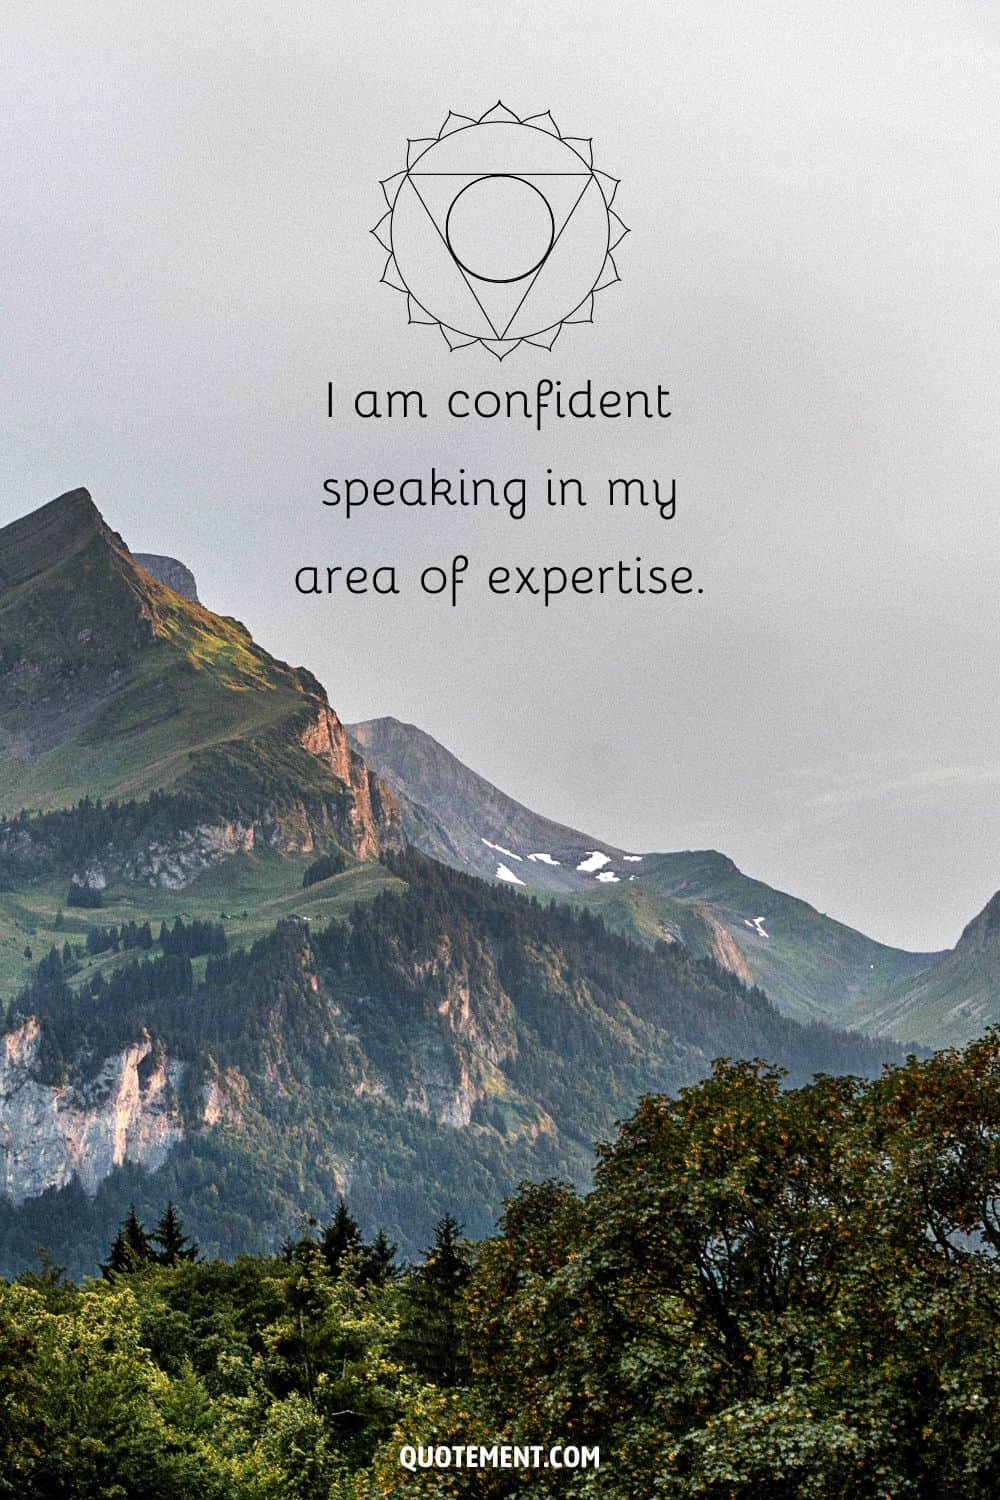 “I am confident speaking in my area of expertise.”